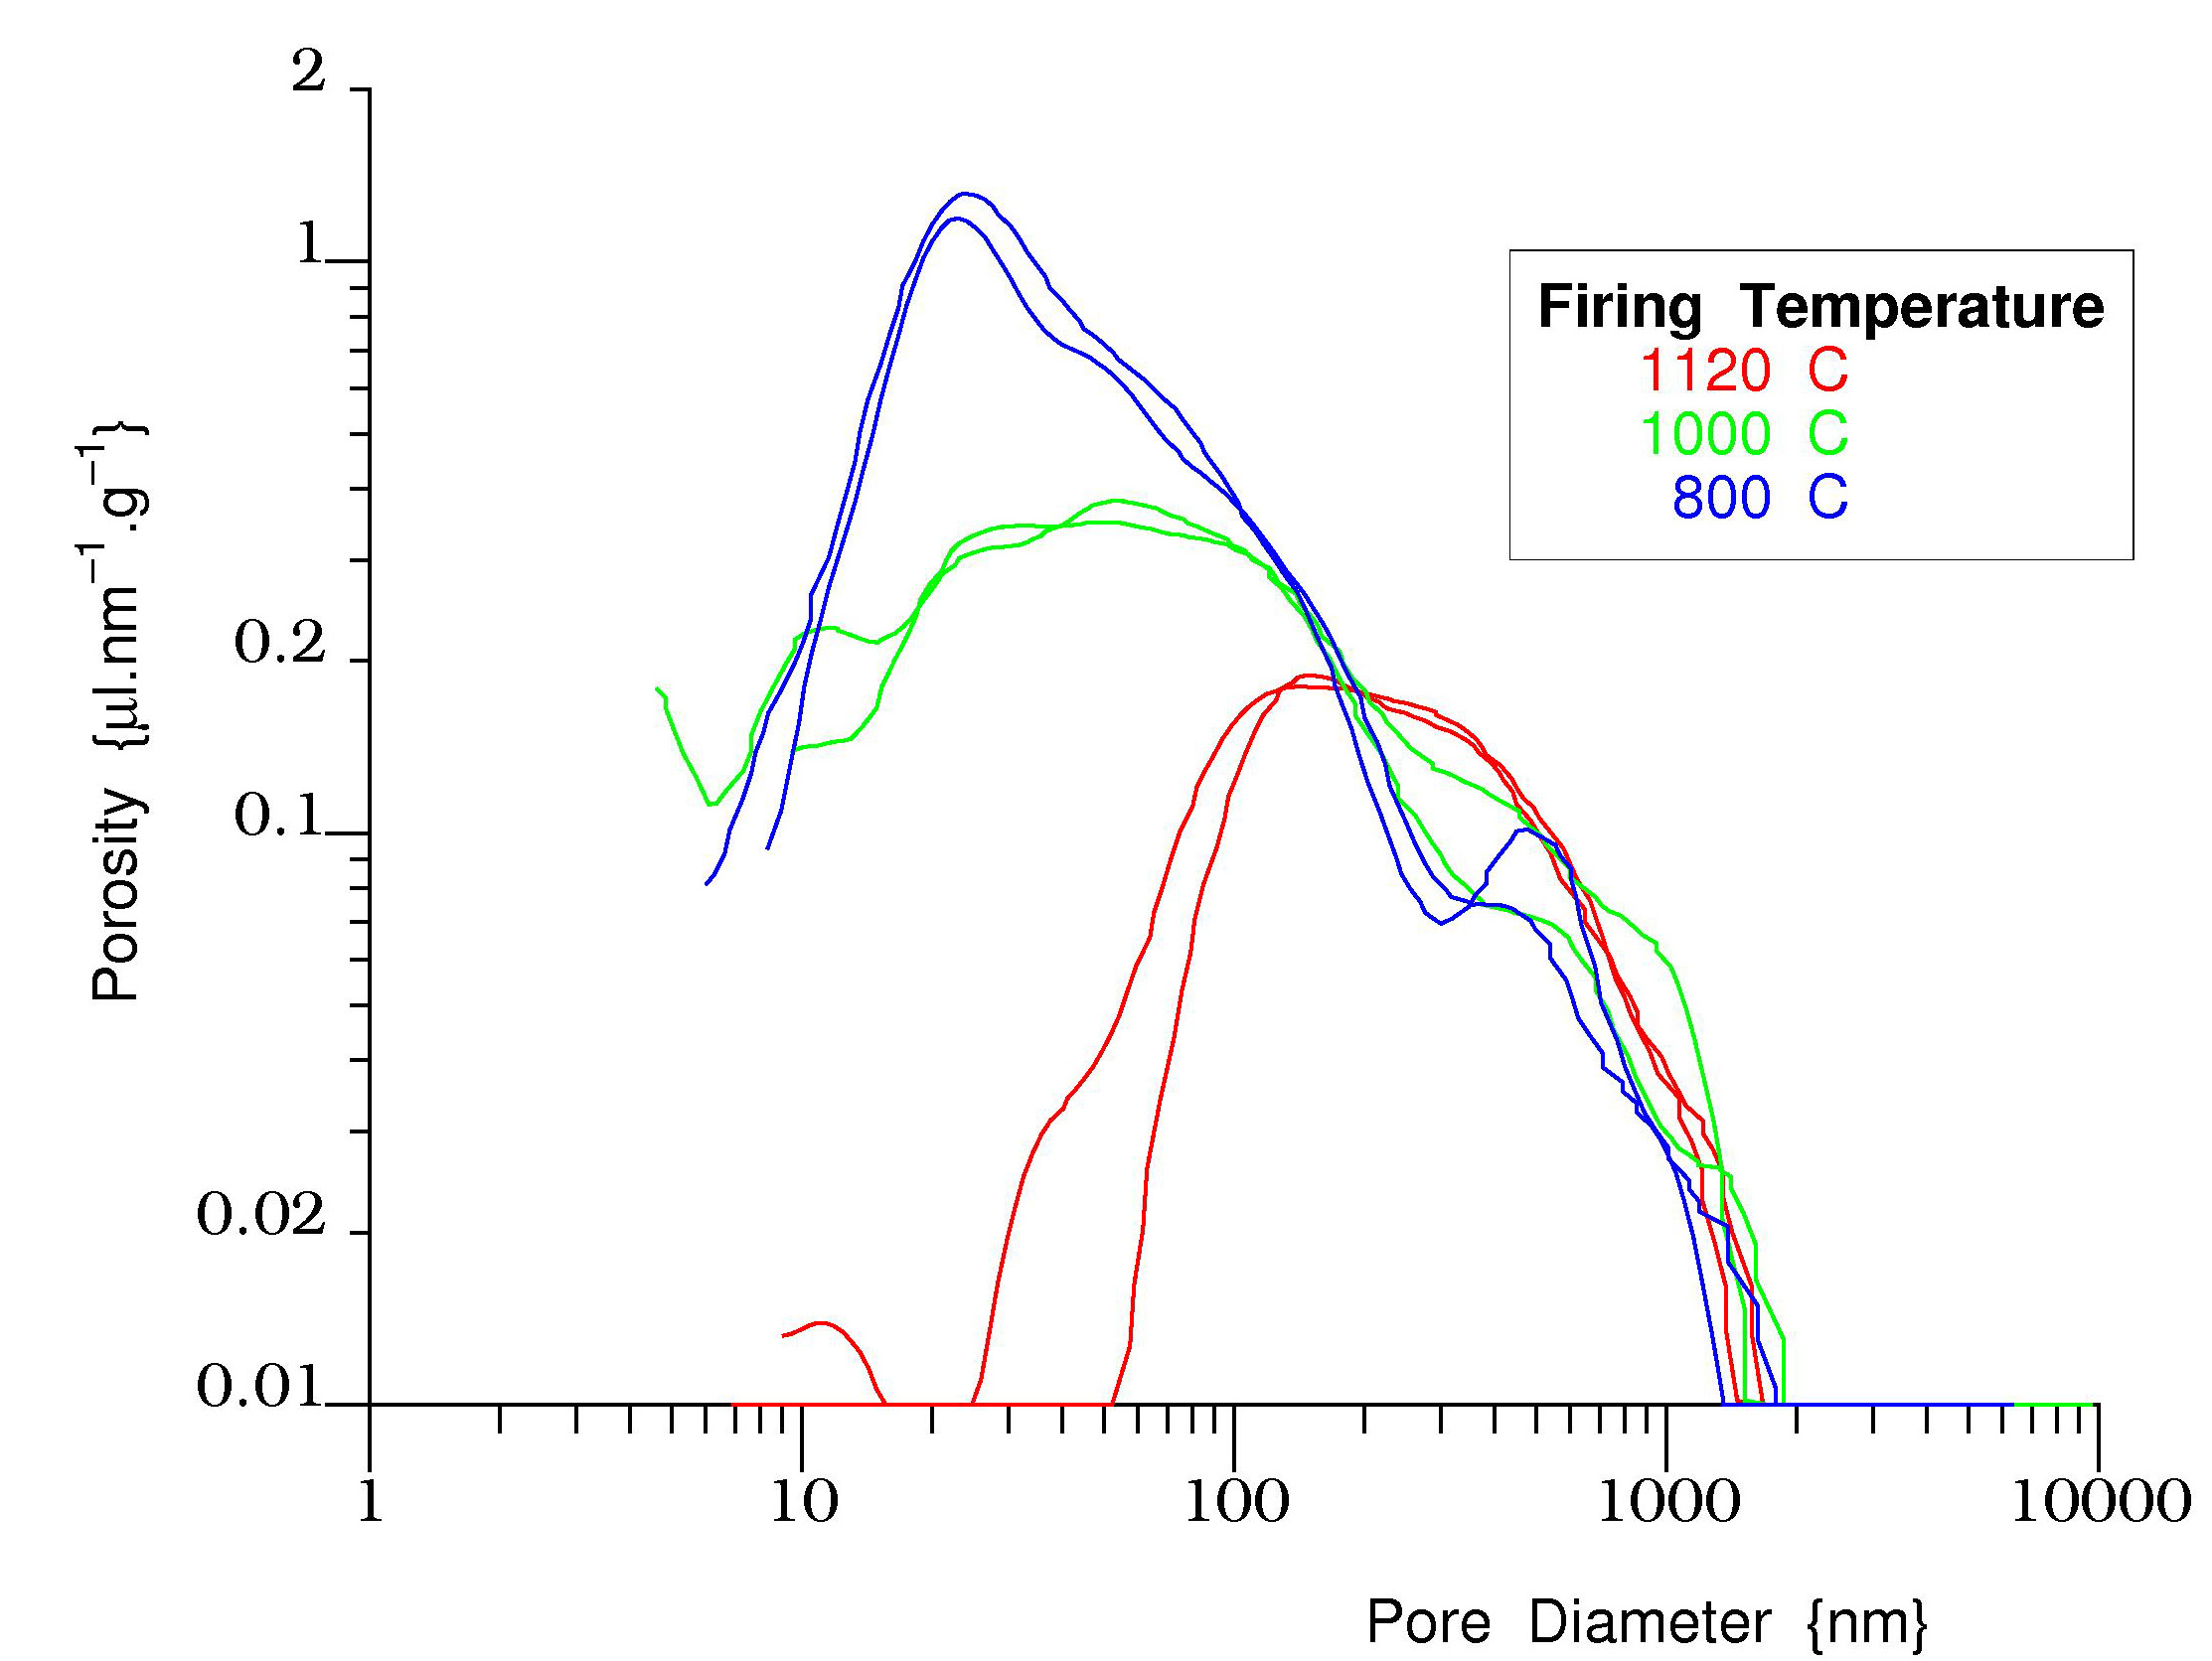 Pore size sistributions for a clay fired at
                      three different temperatures, measured by NMR
                      Cryoporometry.